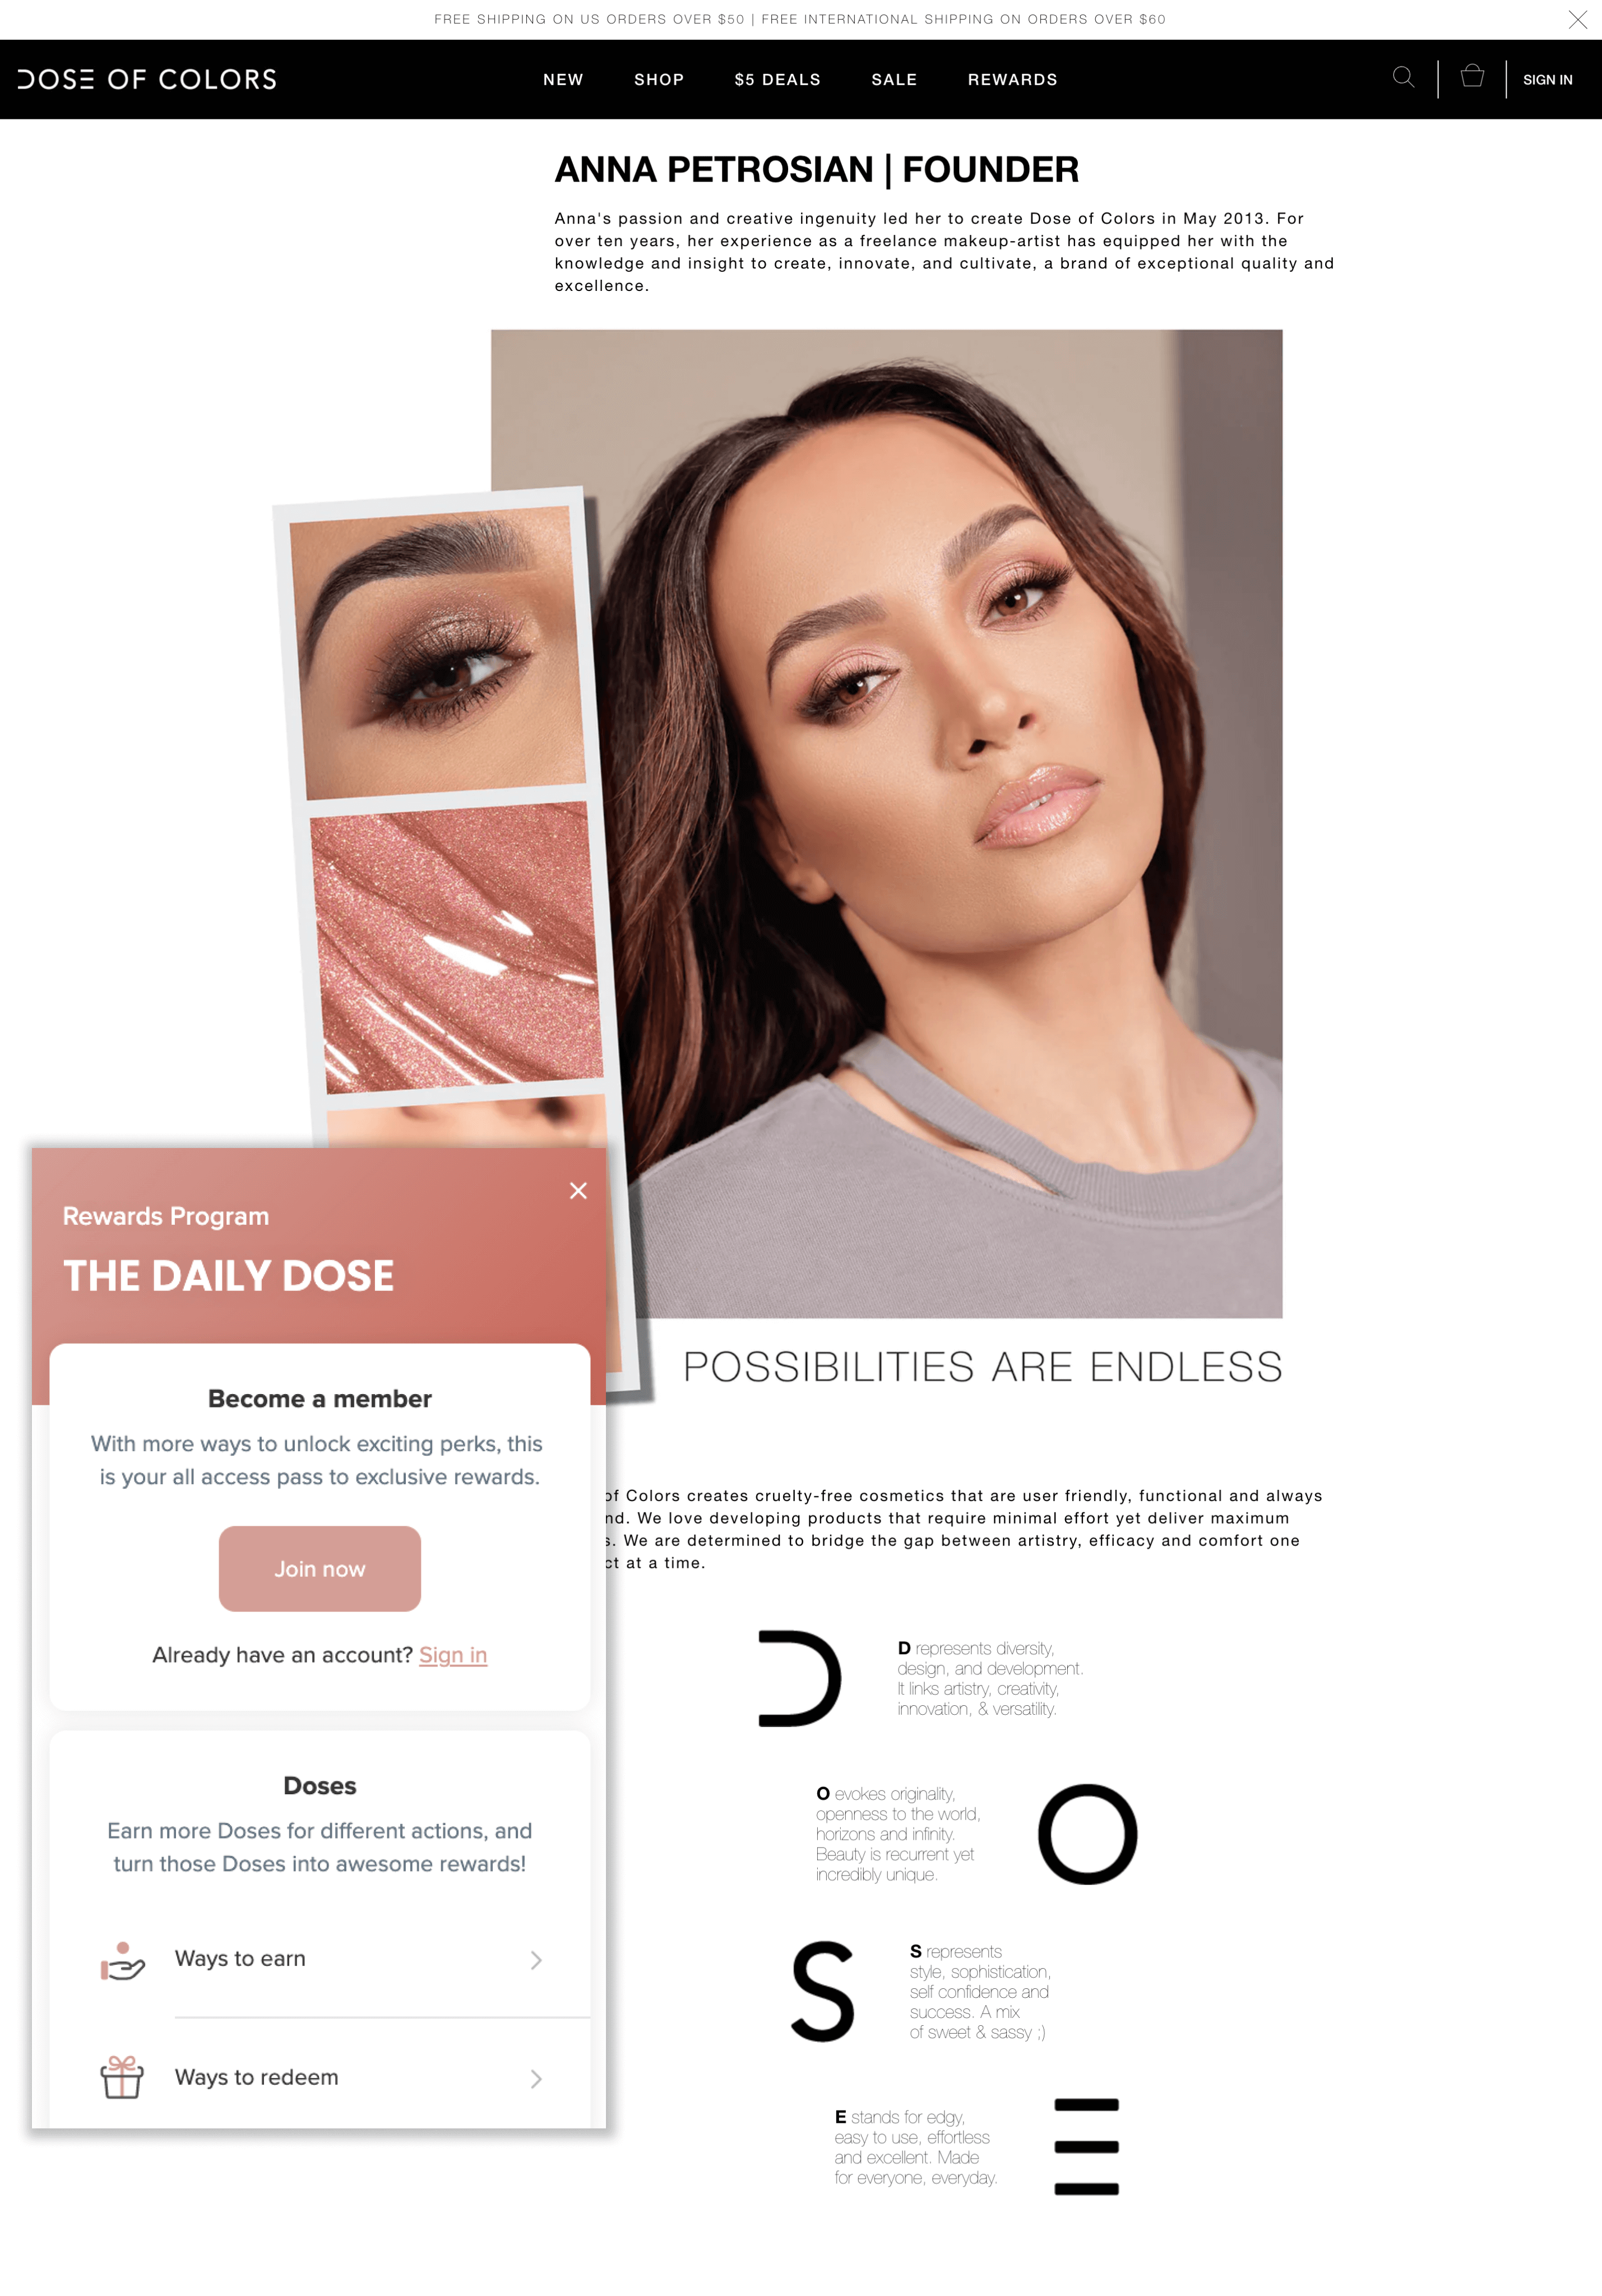 7 VIP Program Examples–A screenshot from Dose of Colors About page. There is an image of the founder, text explaining her and the brand, and a rewards panel encouraging customers to join the program.